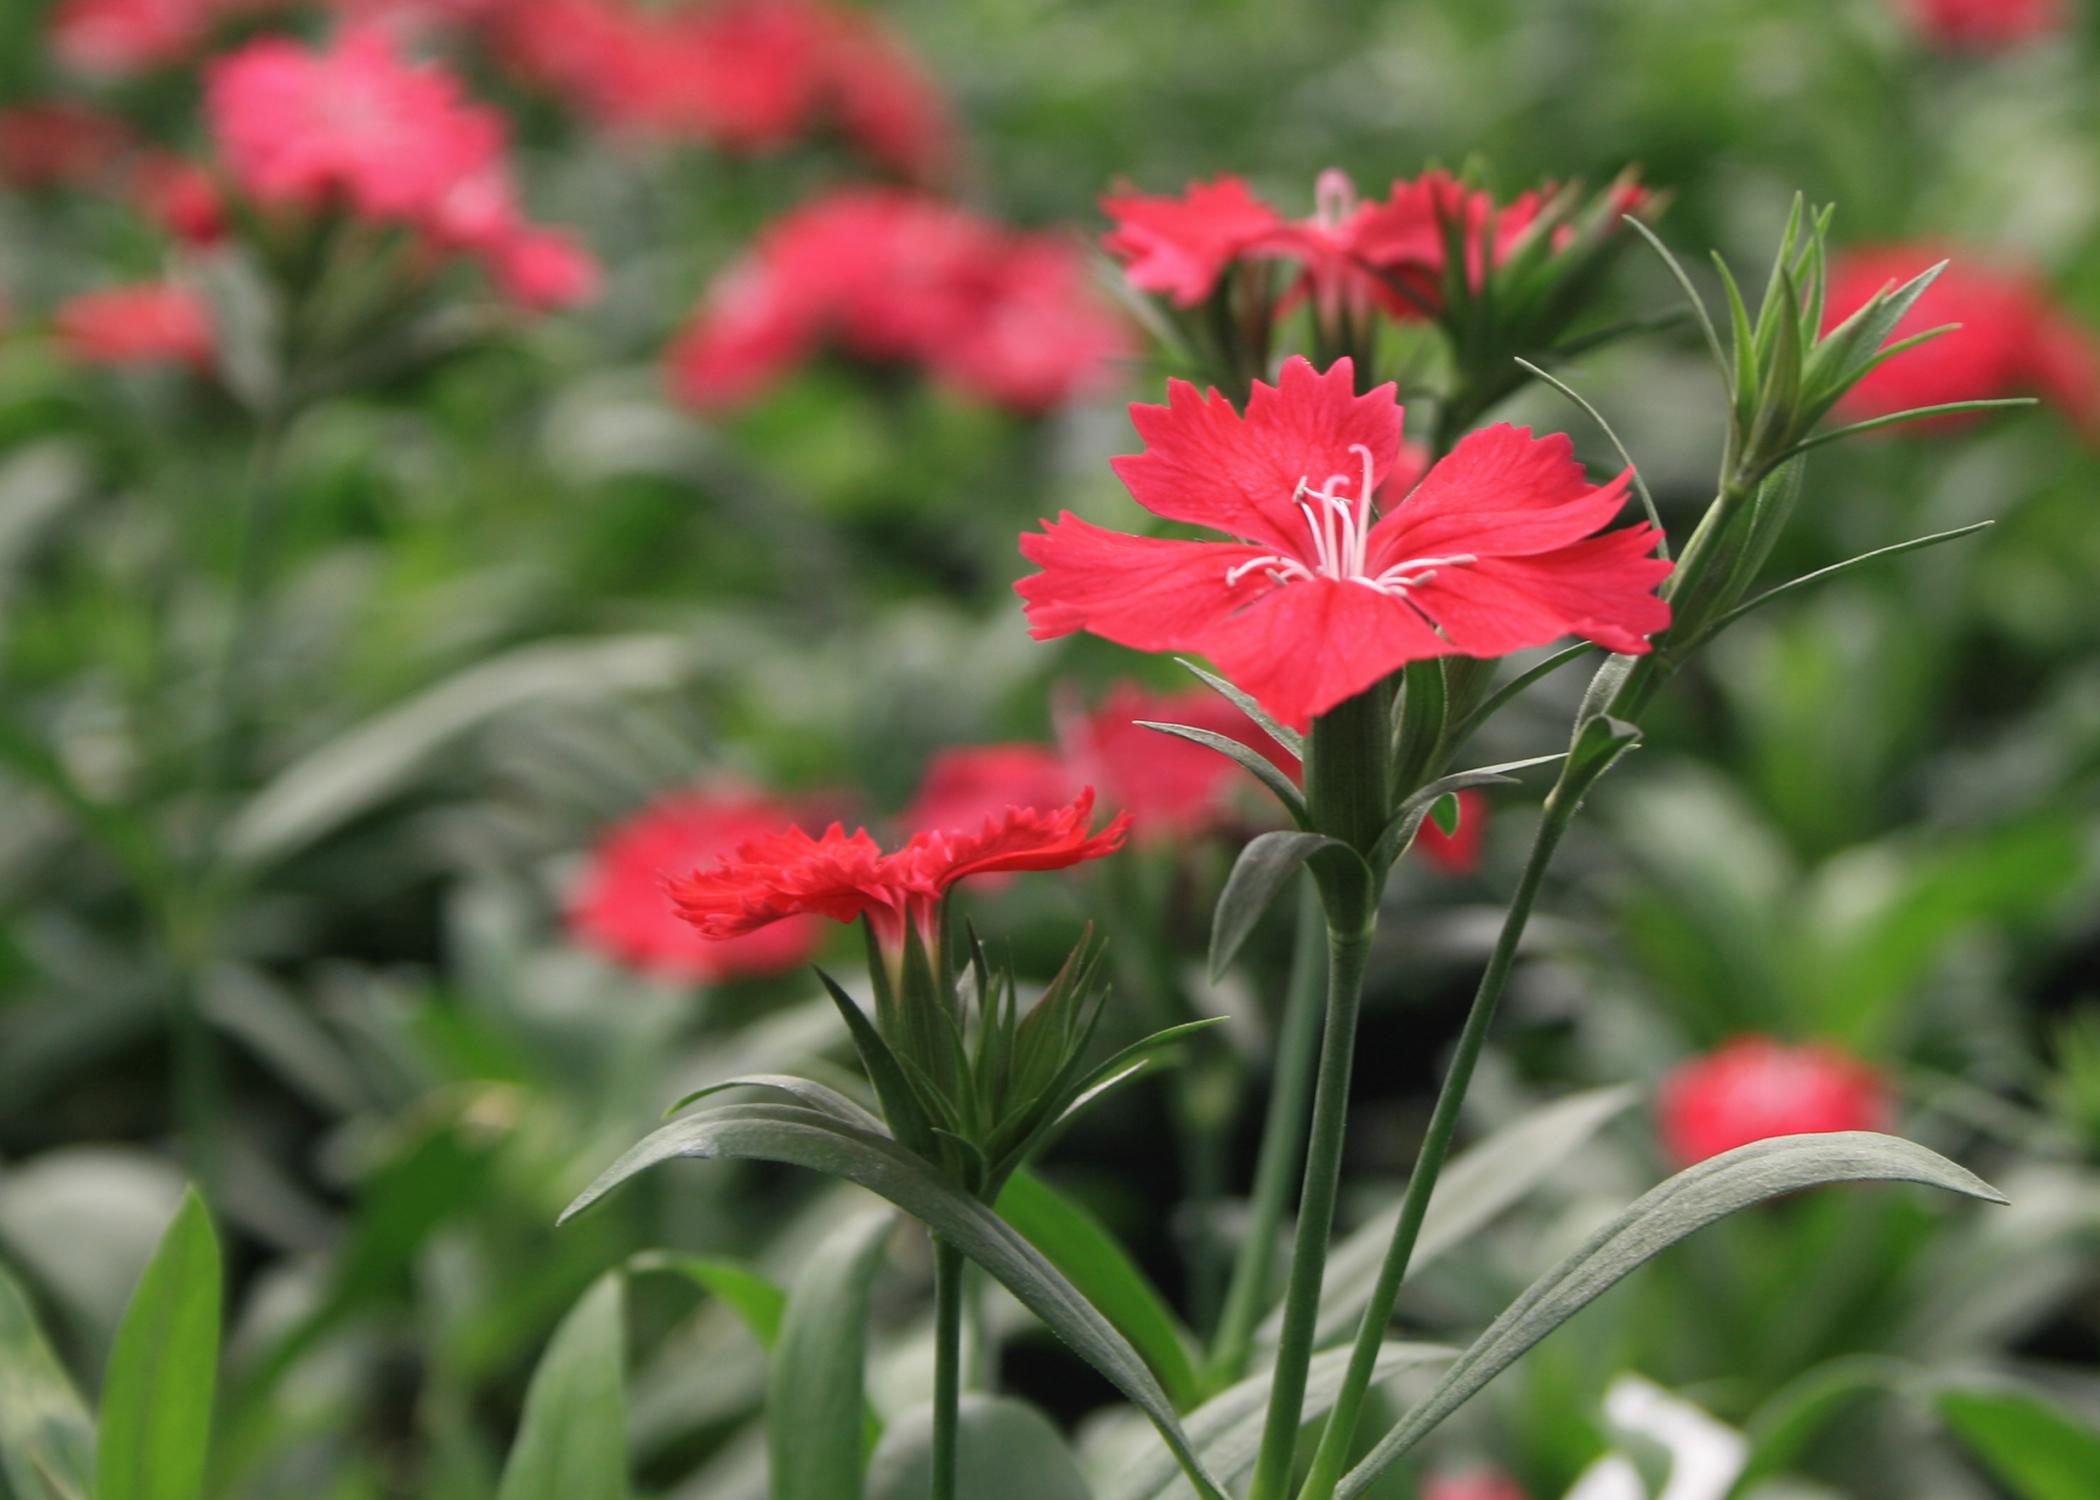 An individual red bloom is in focus in front of other, scattered red blooms.